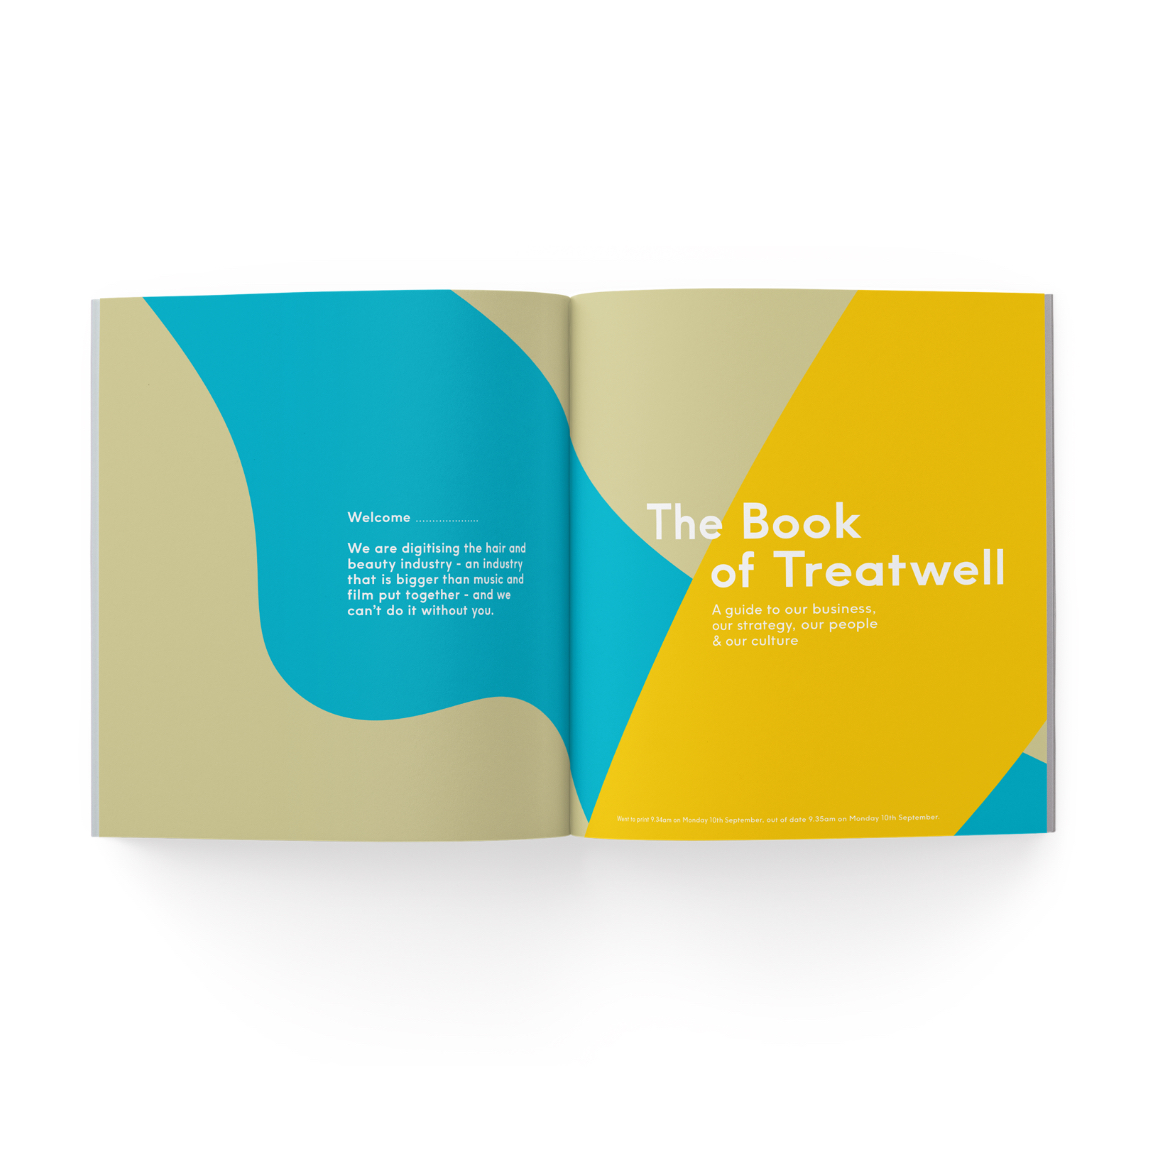 The Book of Treatwell